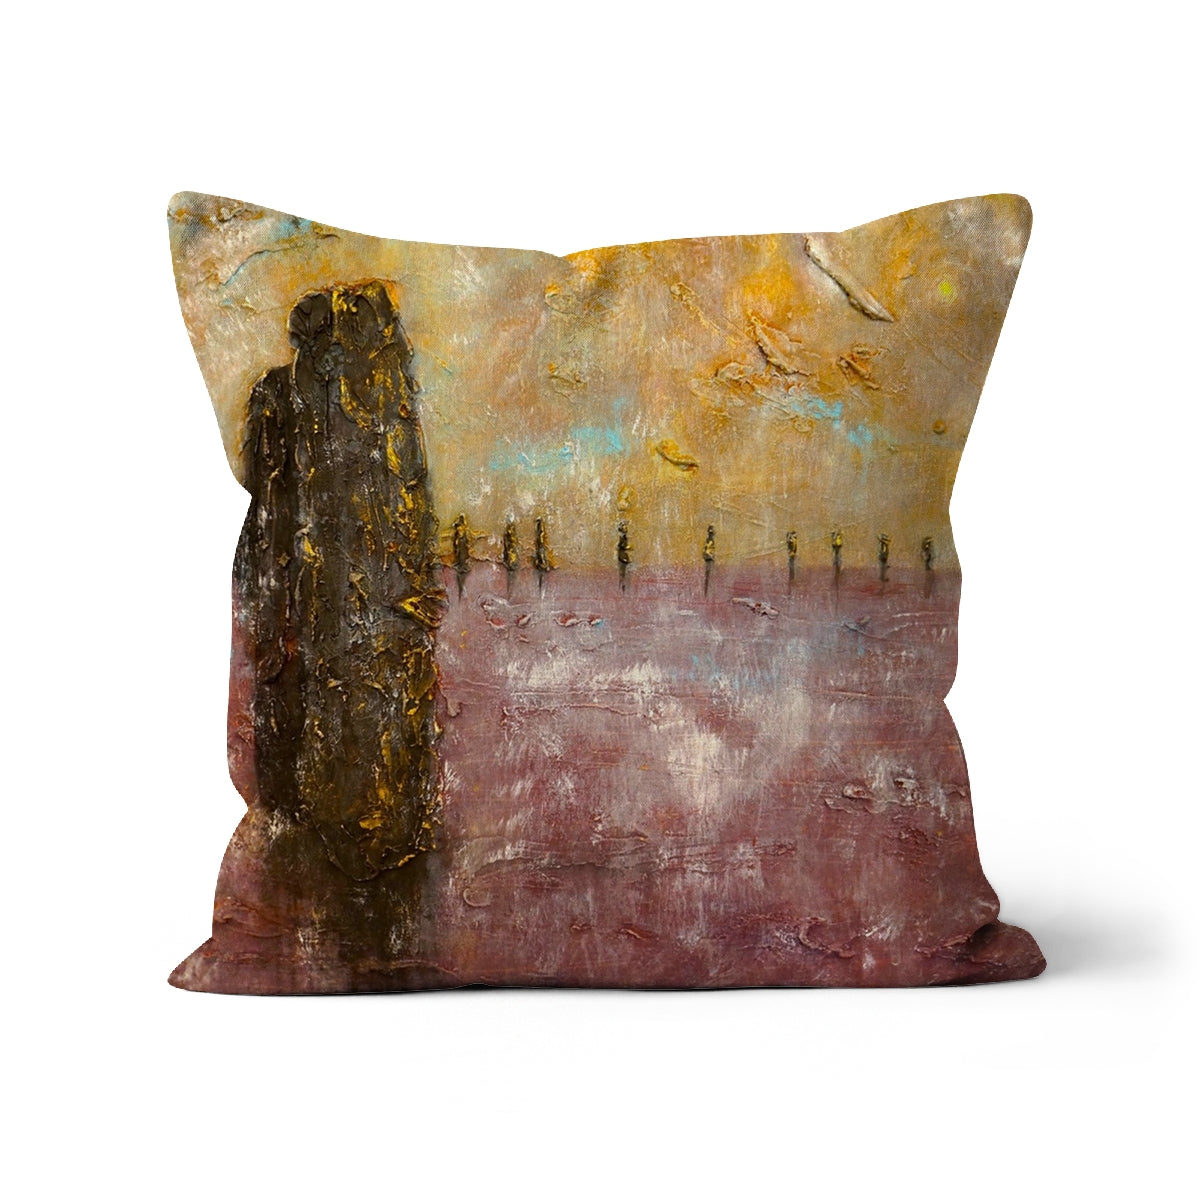 Brodgar Mist Orkney Art Gifts Cushion-Cushions-Orkney Art Gallery-Linen-24"x24"-Paintings, Prints, Homeware, Art Gifts From Scotland By Scottish Artist Kevin Hunter